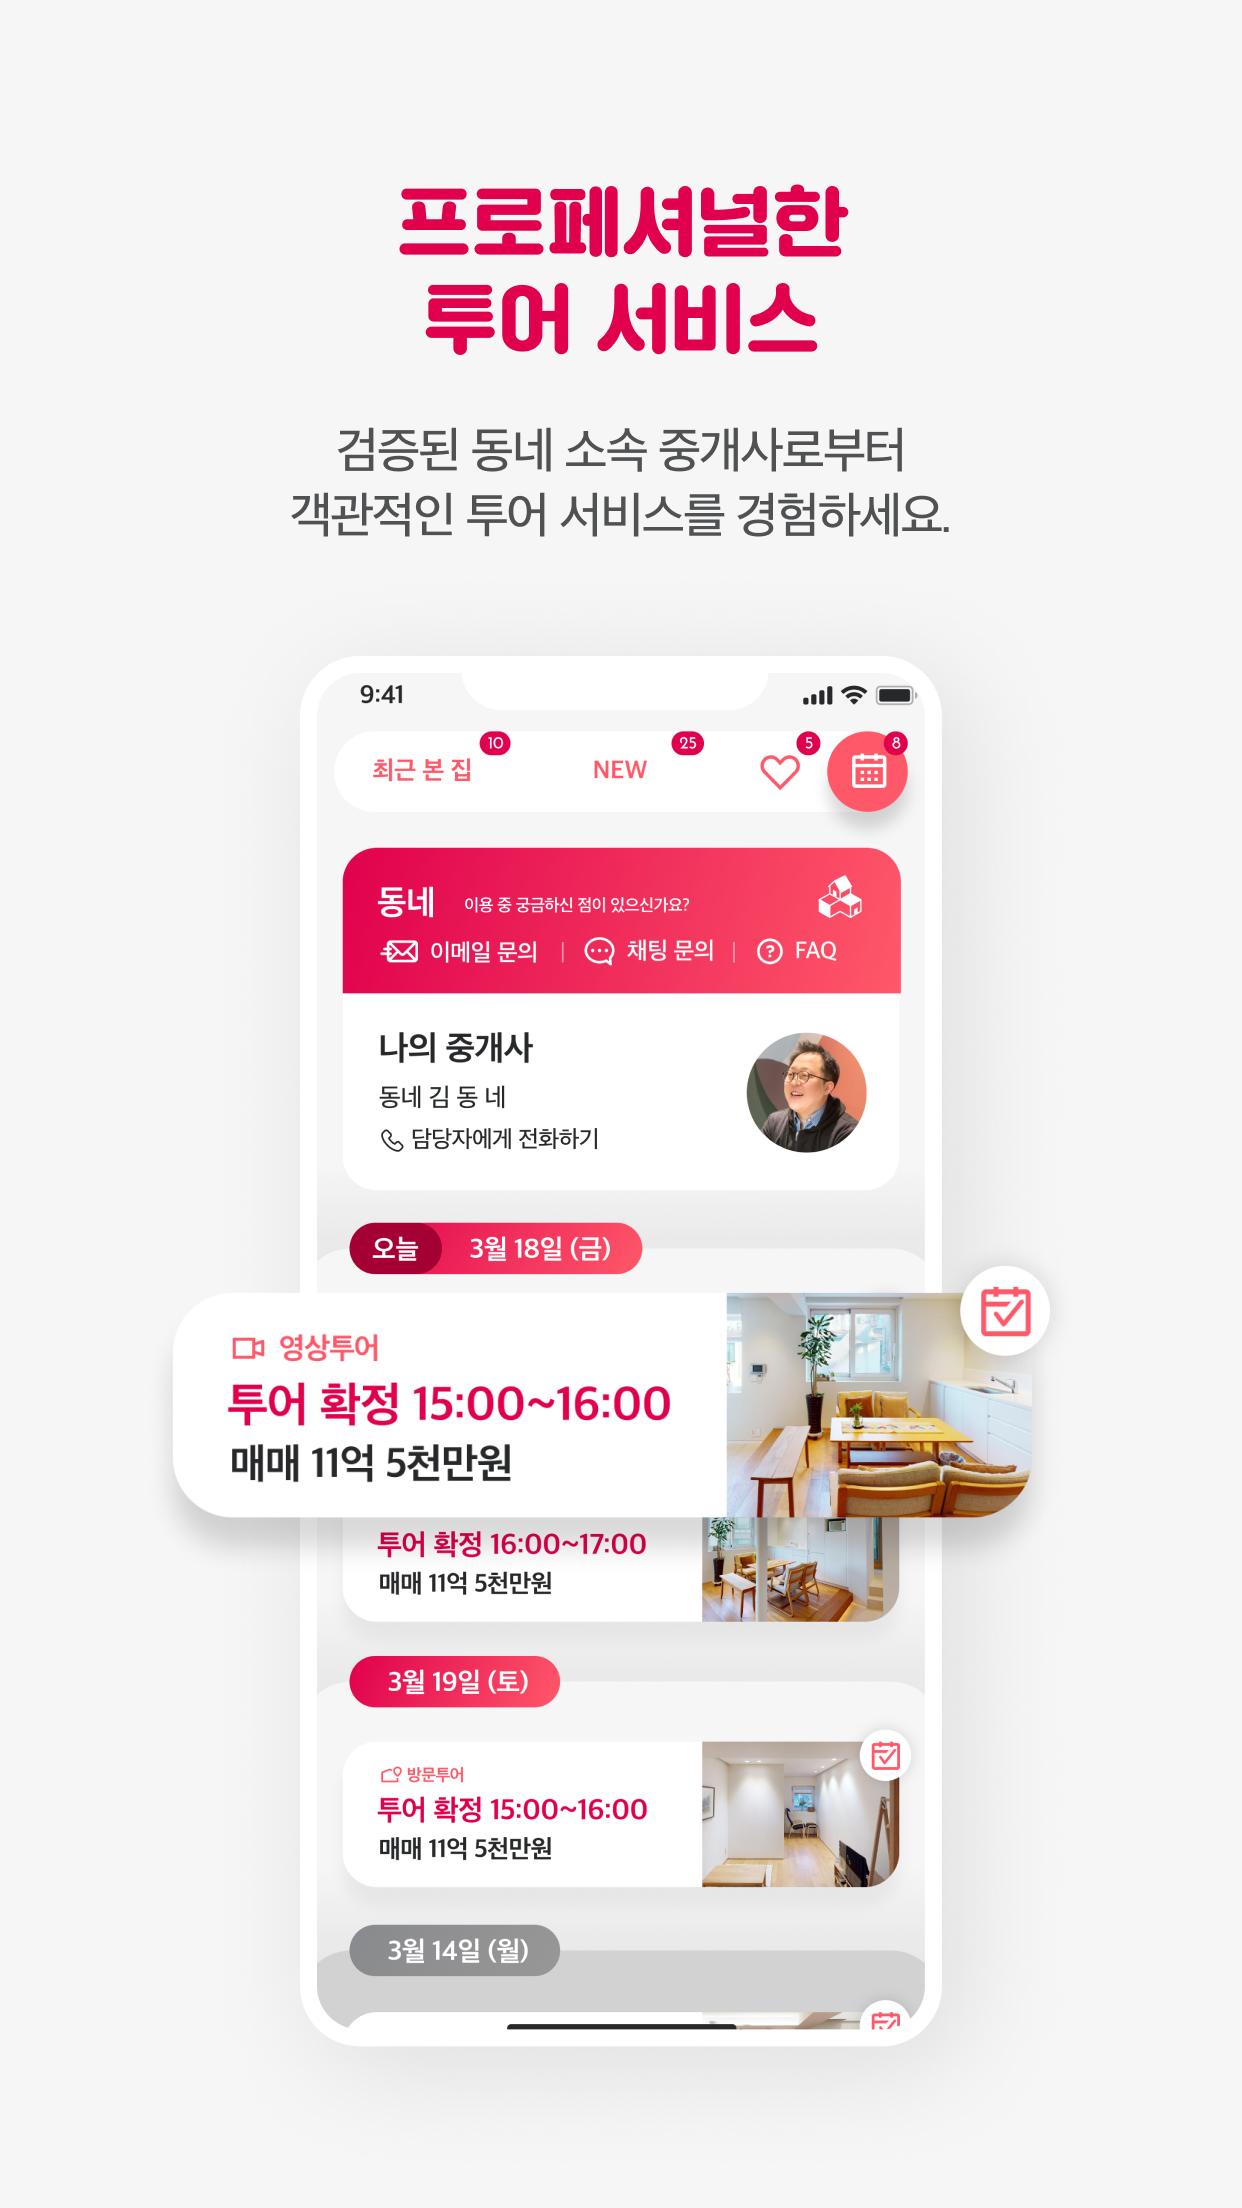 Dongnae Real Estate: Find Your Home 1.0.2 Screenshot 10